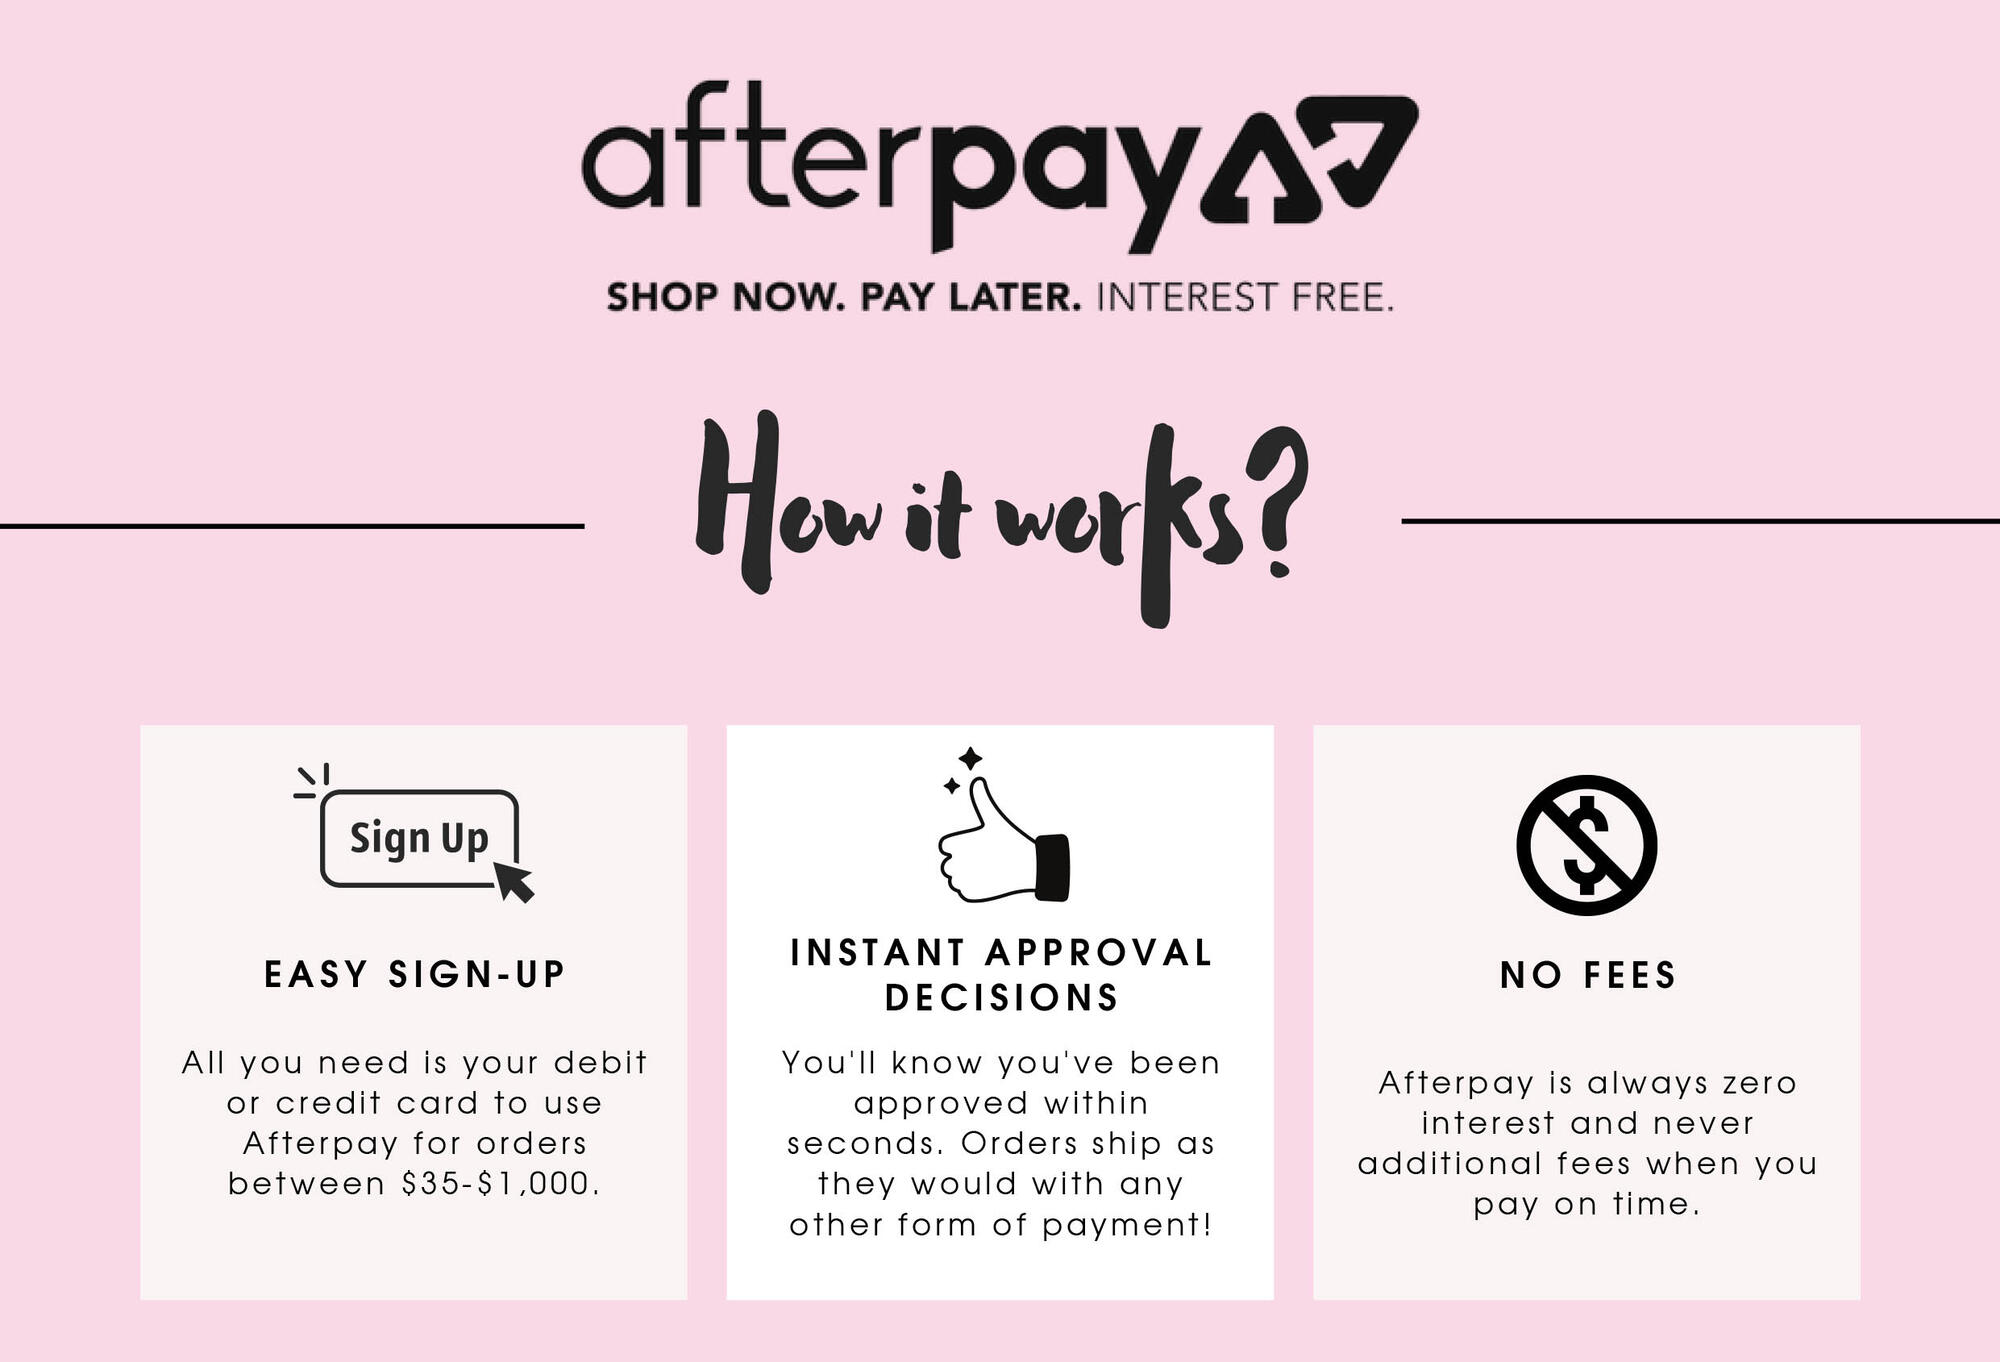 afterpaya? SHOP NOW. PAY LATER. INTEREST FREE. Al Sign Up snee EASY SIGN-UP All you need is your debit or credit card to use Afterpay for orders between $35-51,000. ow it worls? 521 INSTANT APPROVAL DECISIONS You'll know you've been approved within seconds. Orders ship as they would with any other form of payment! NO FEES Afterpay is always zero interest and never additional fees when you pay on time. 